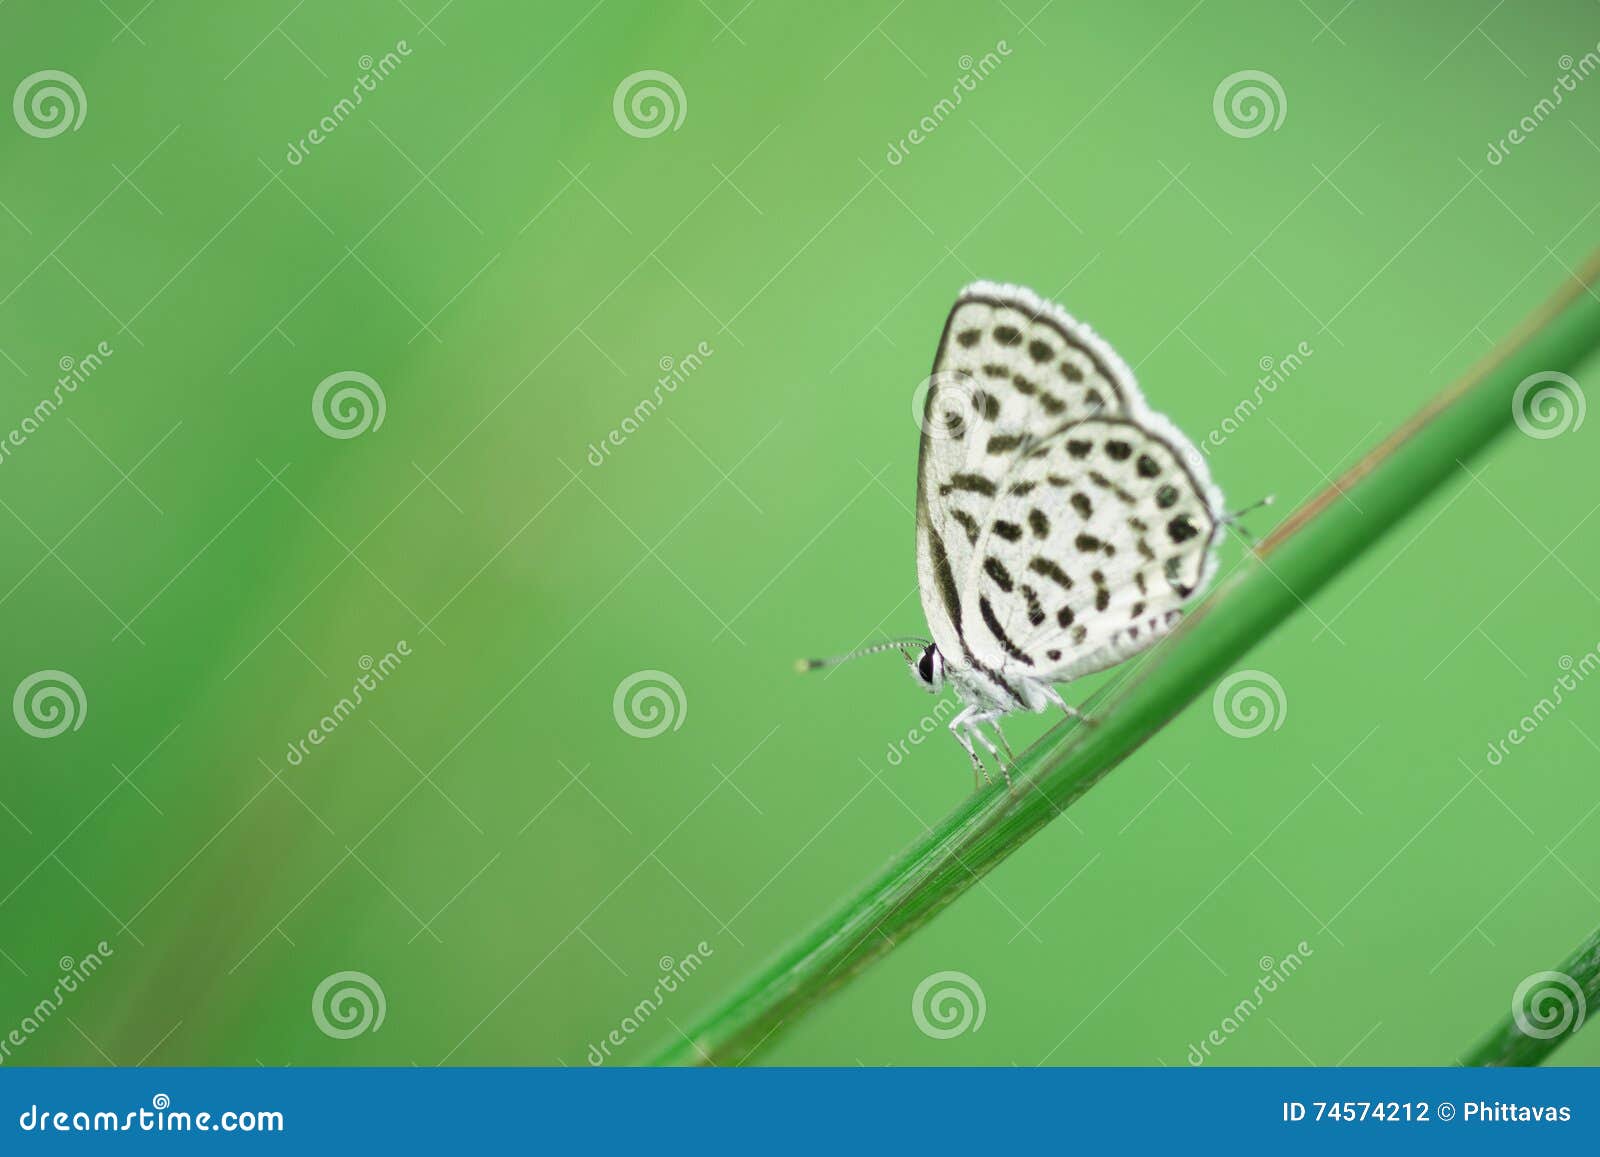 butterfly perching on greem leaves as background